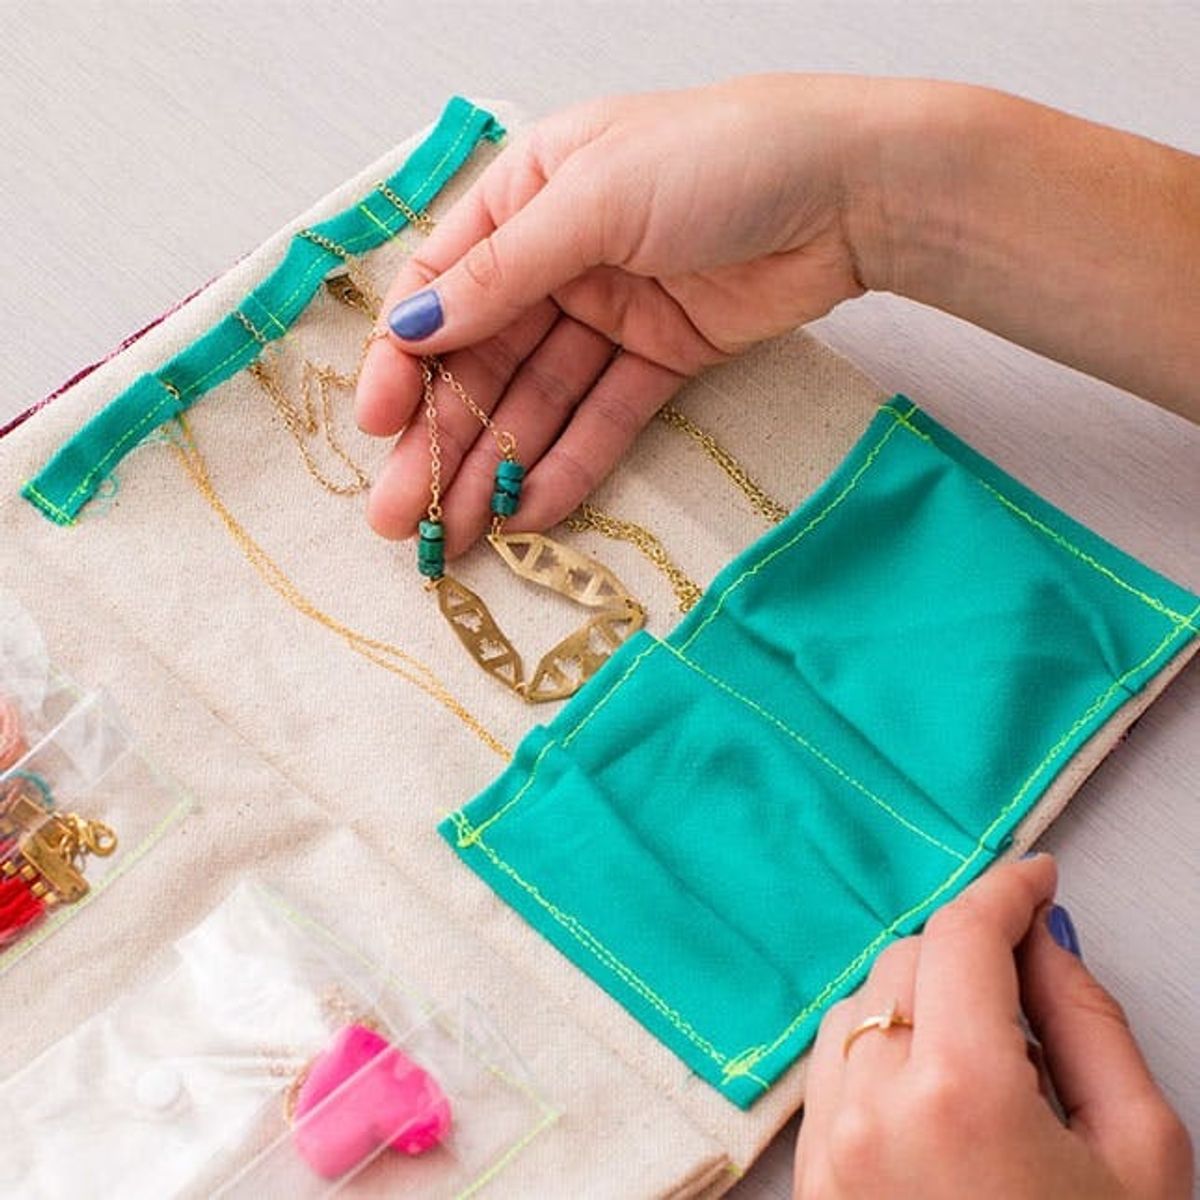 Style On-the-Go: How to Make a DIY Travel Jewelry Organizer